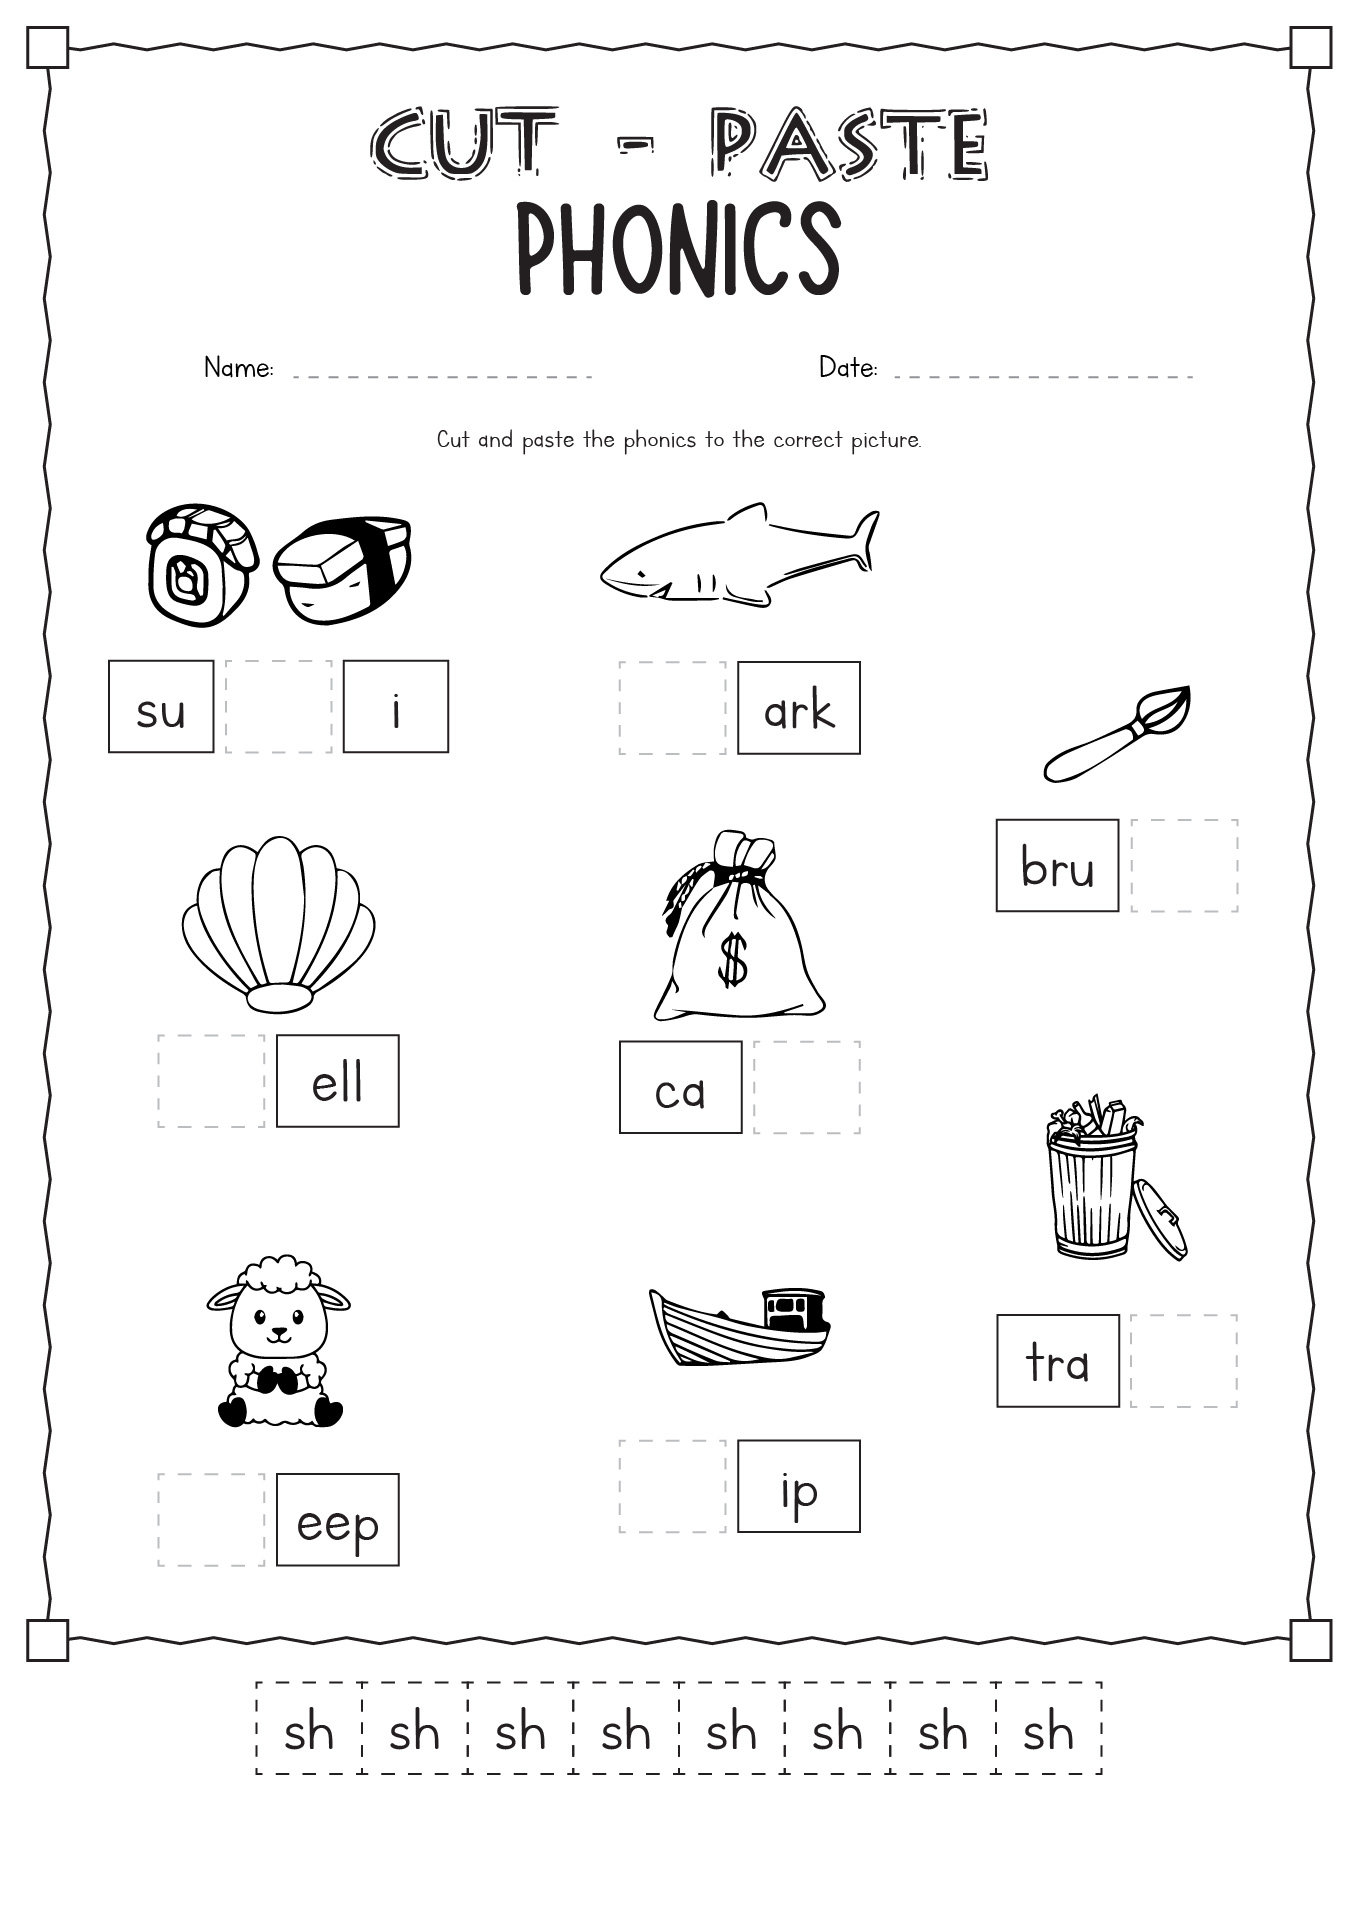 Cut and Paste Phonics Worksheets Image